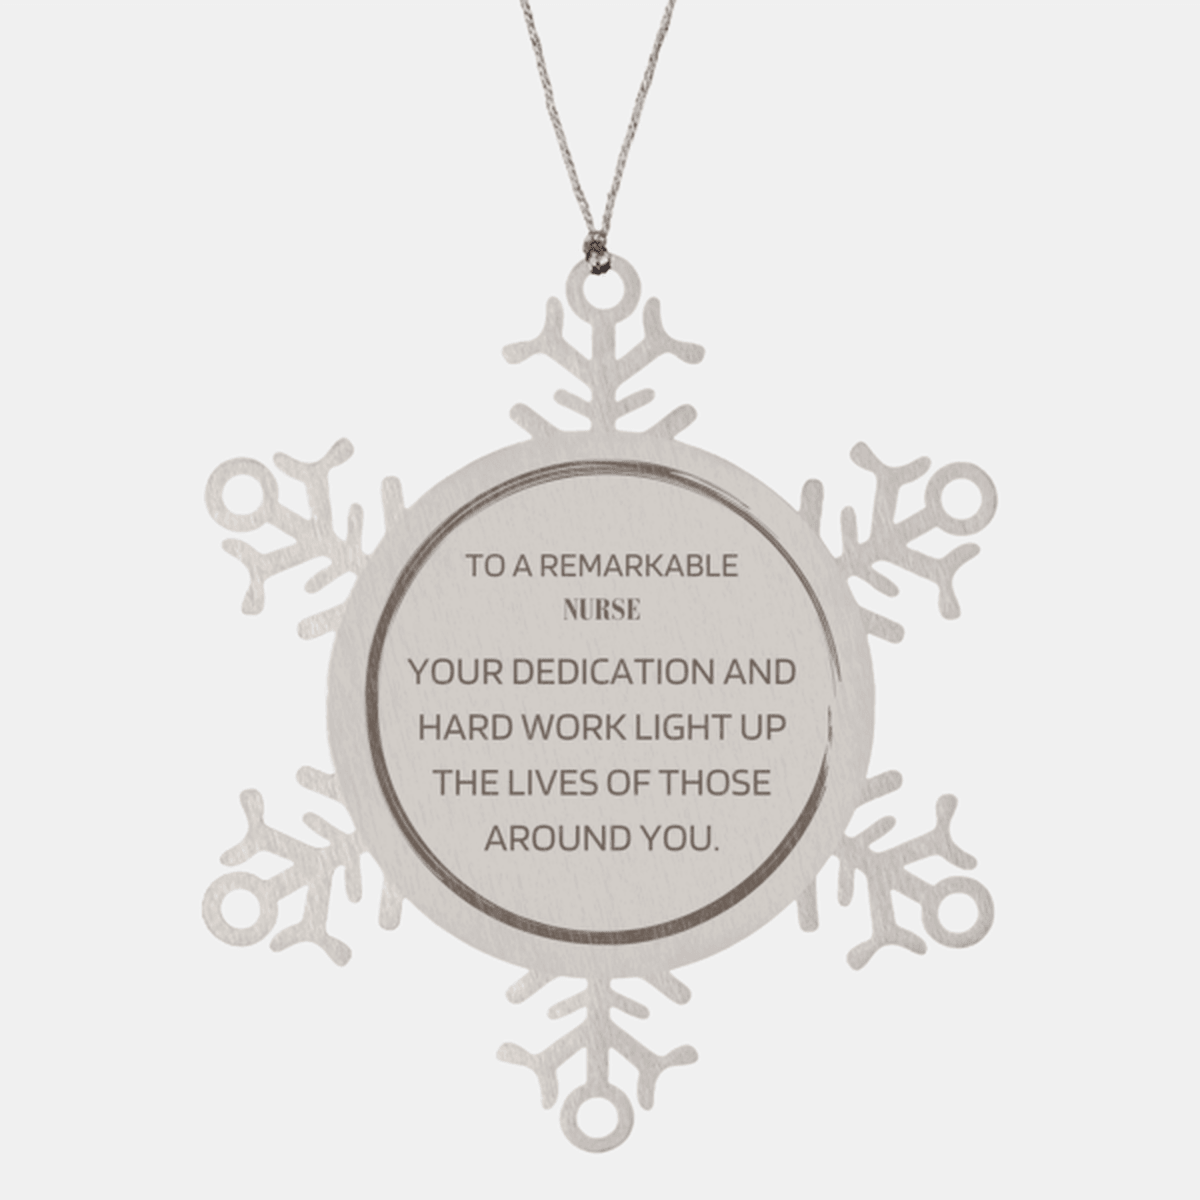 Remarkable Nurse Gifts, Your dedication and hard work, Inspirational Birthday Christmas Unique Snowflake Ornament For Nurse, Coworkers, Men, Women, Friends - Mallard Moon Gift Shop